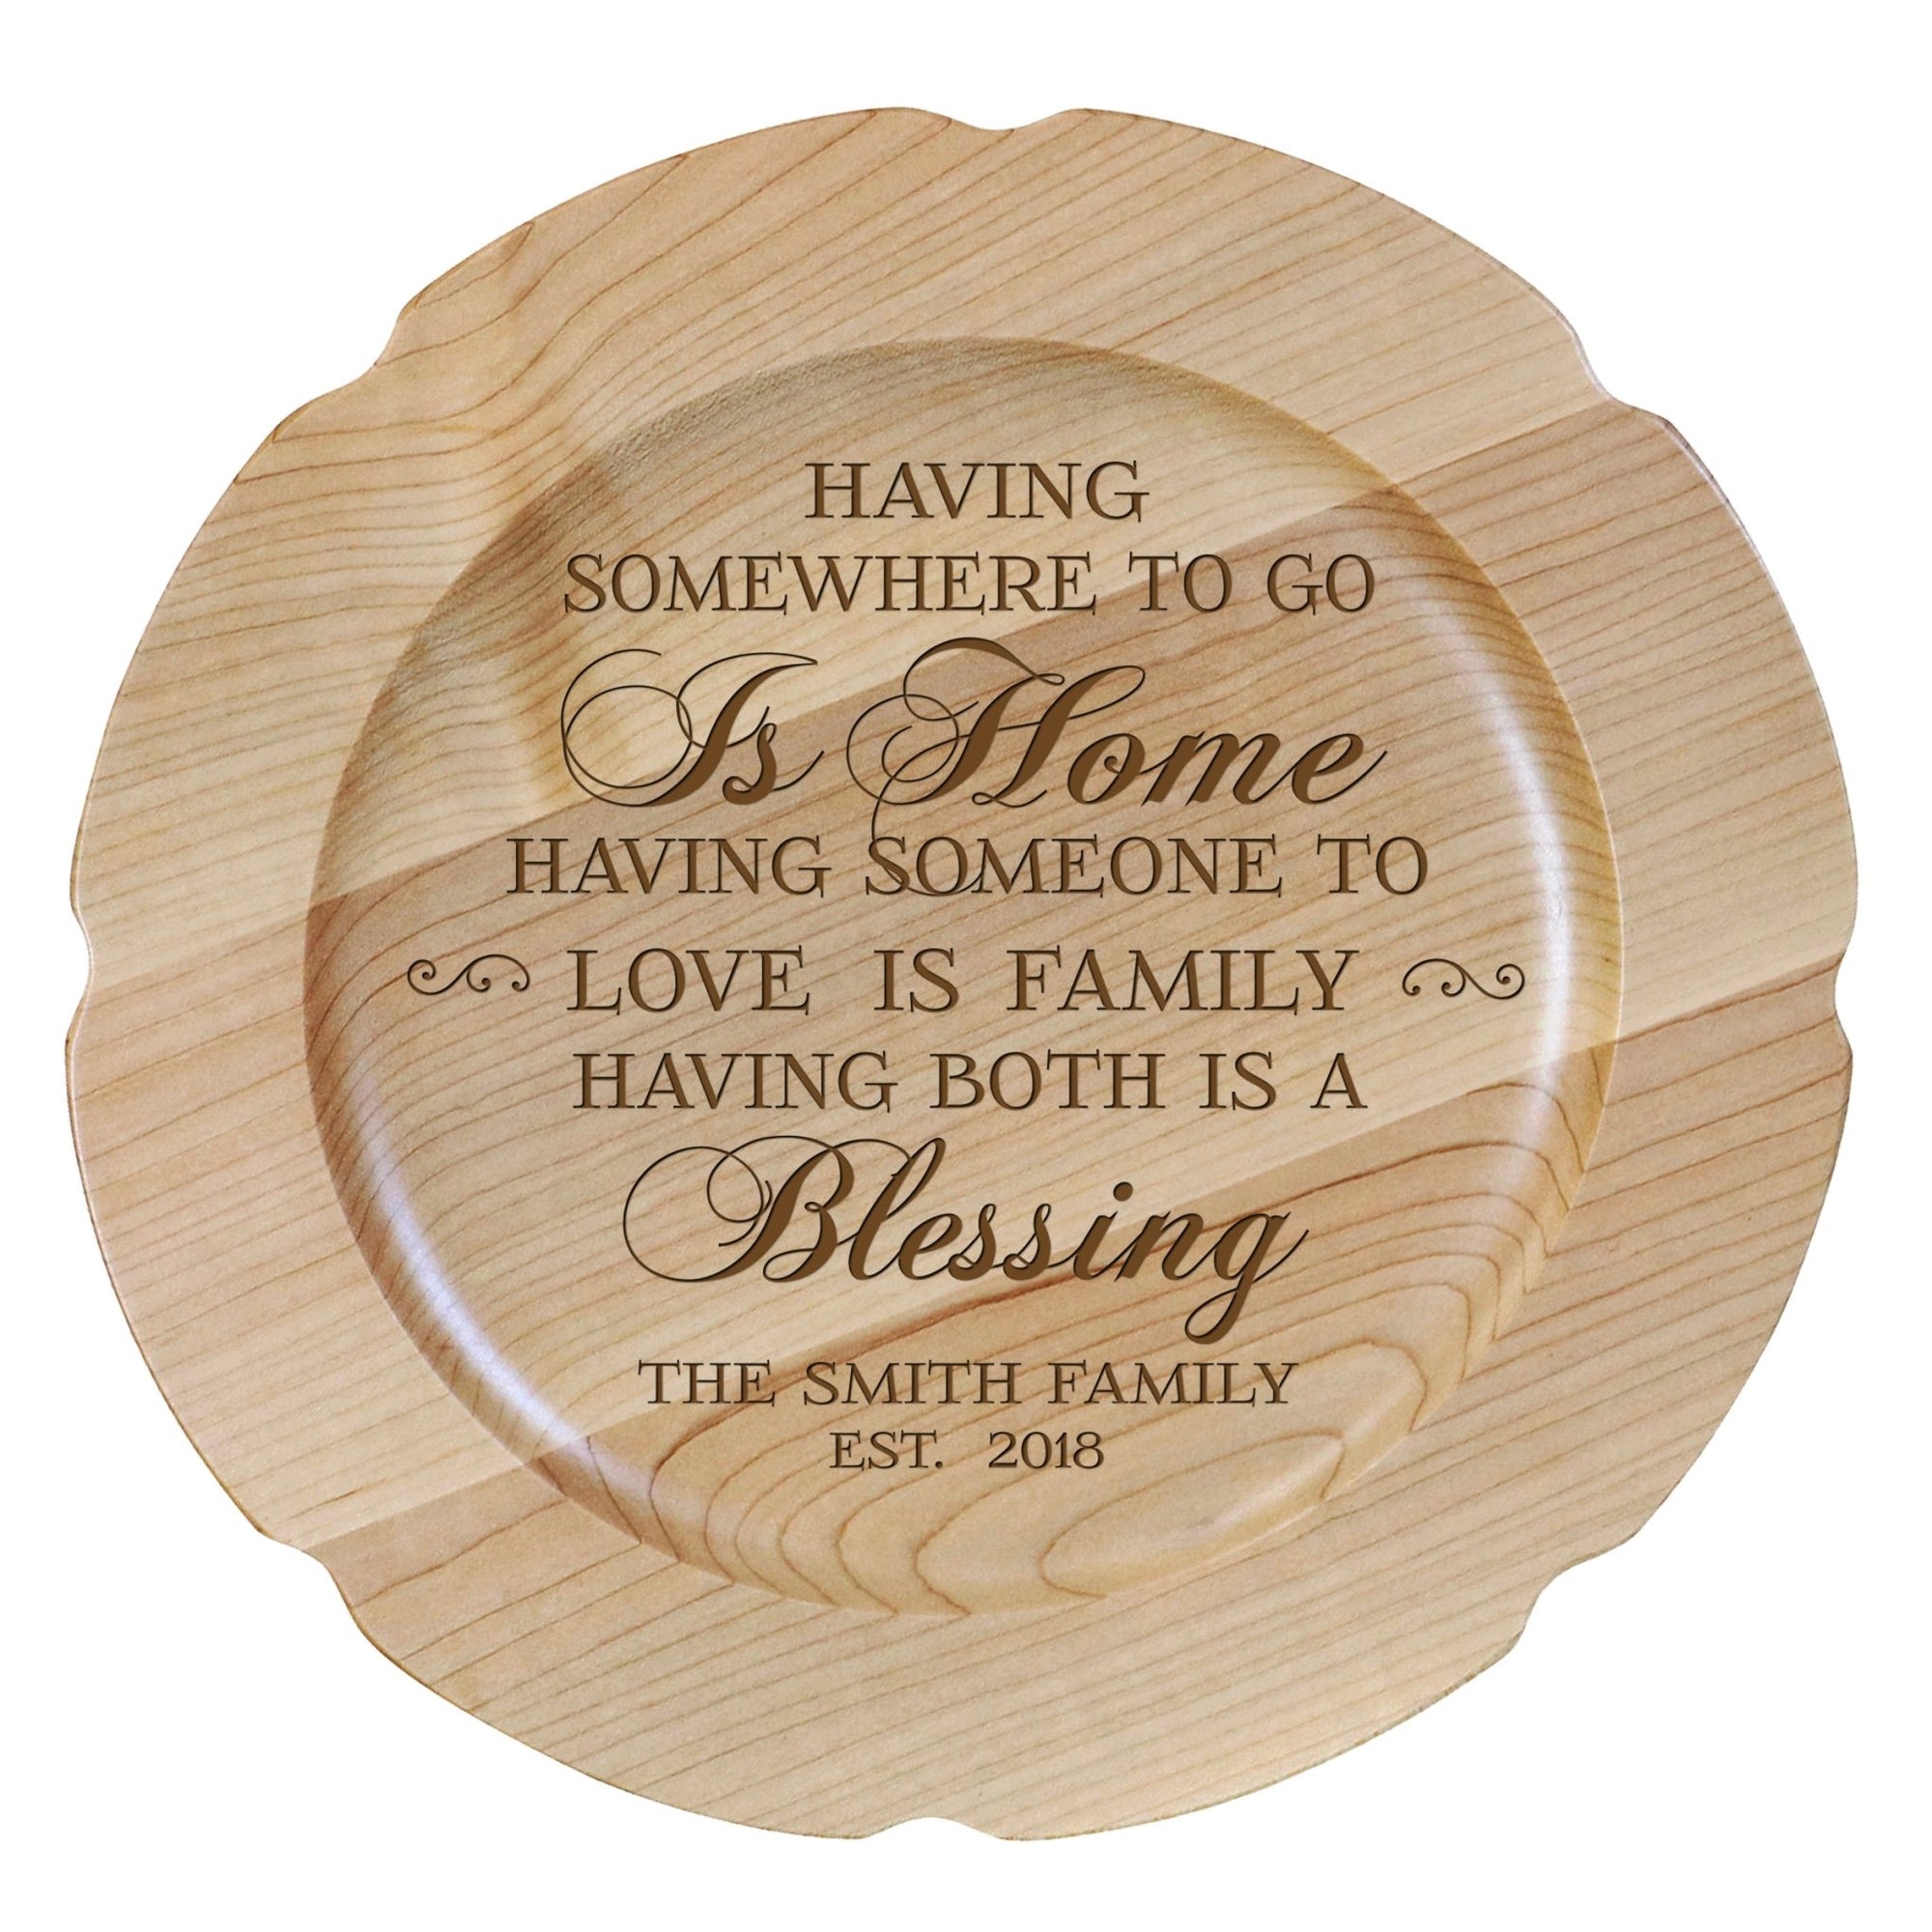 Personalized Inspirational Plates With Quotes - Blessing - LifeSong Milestones